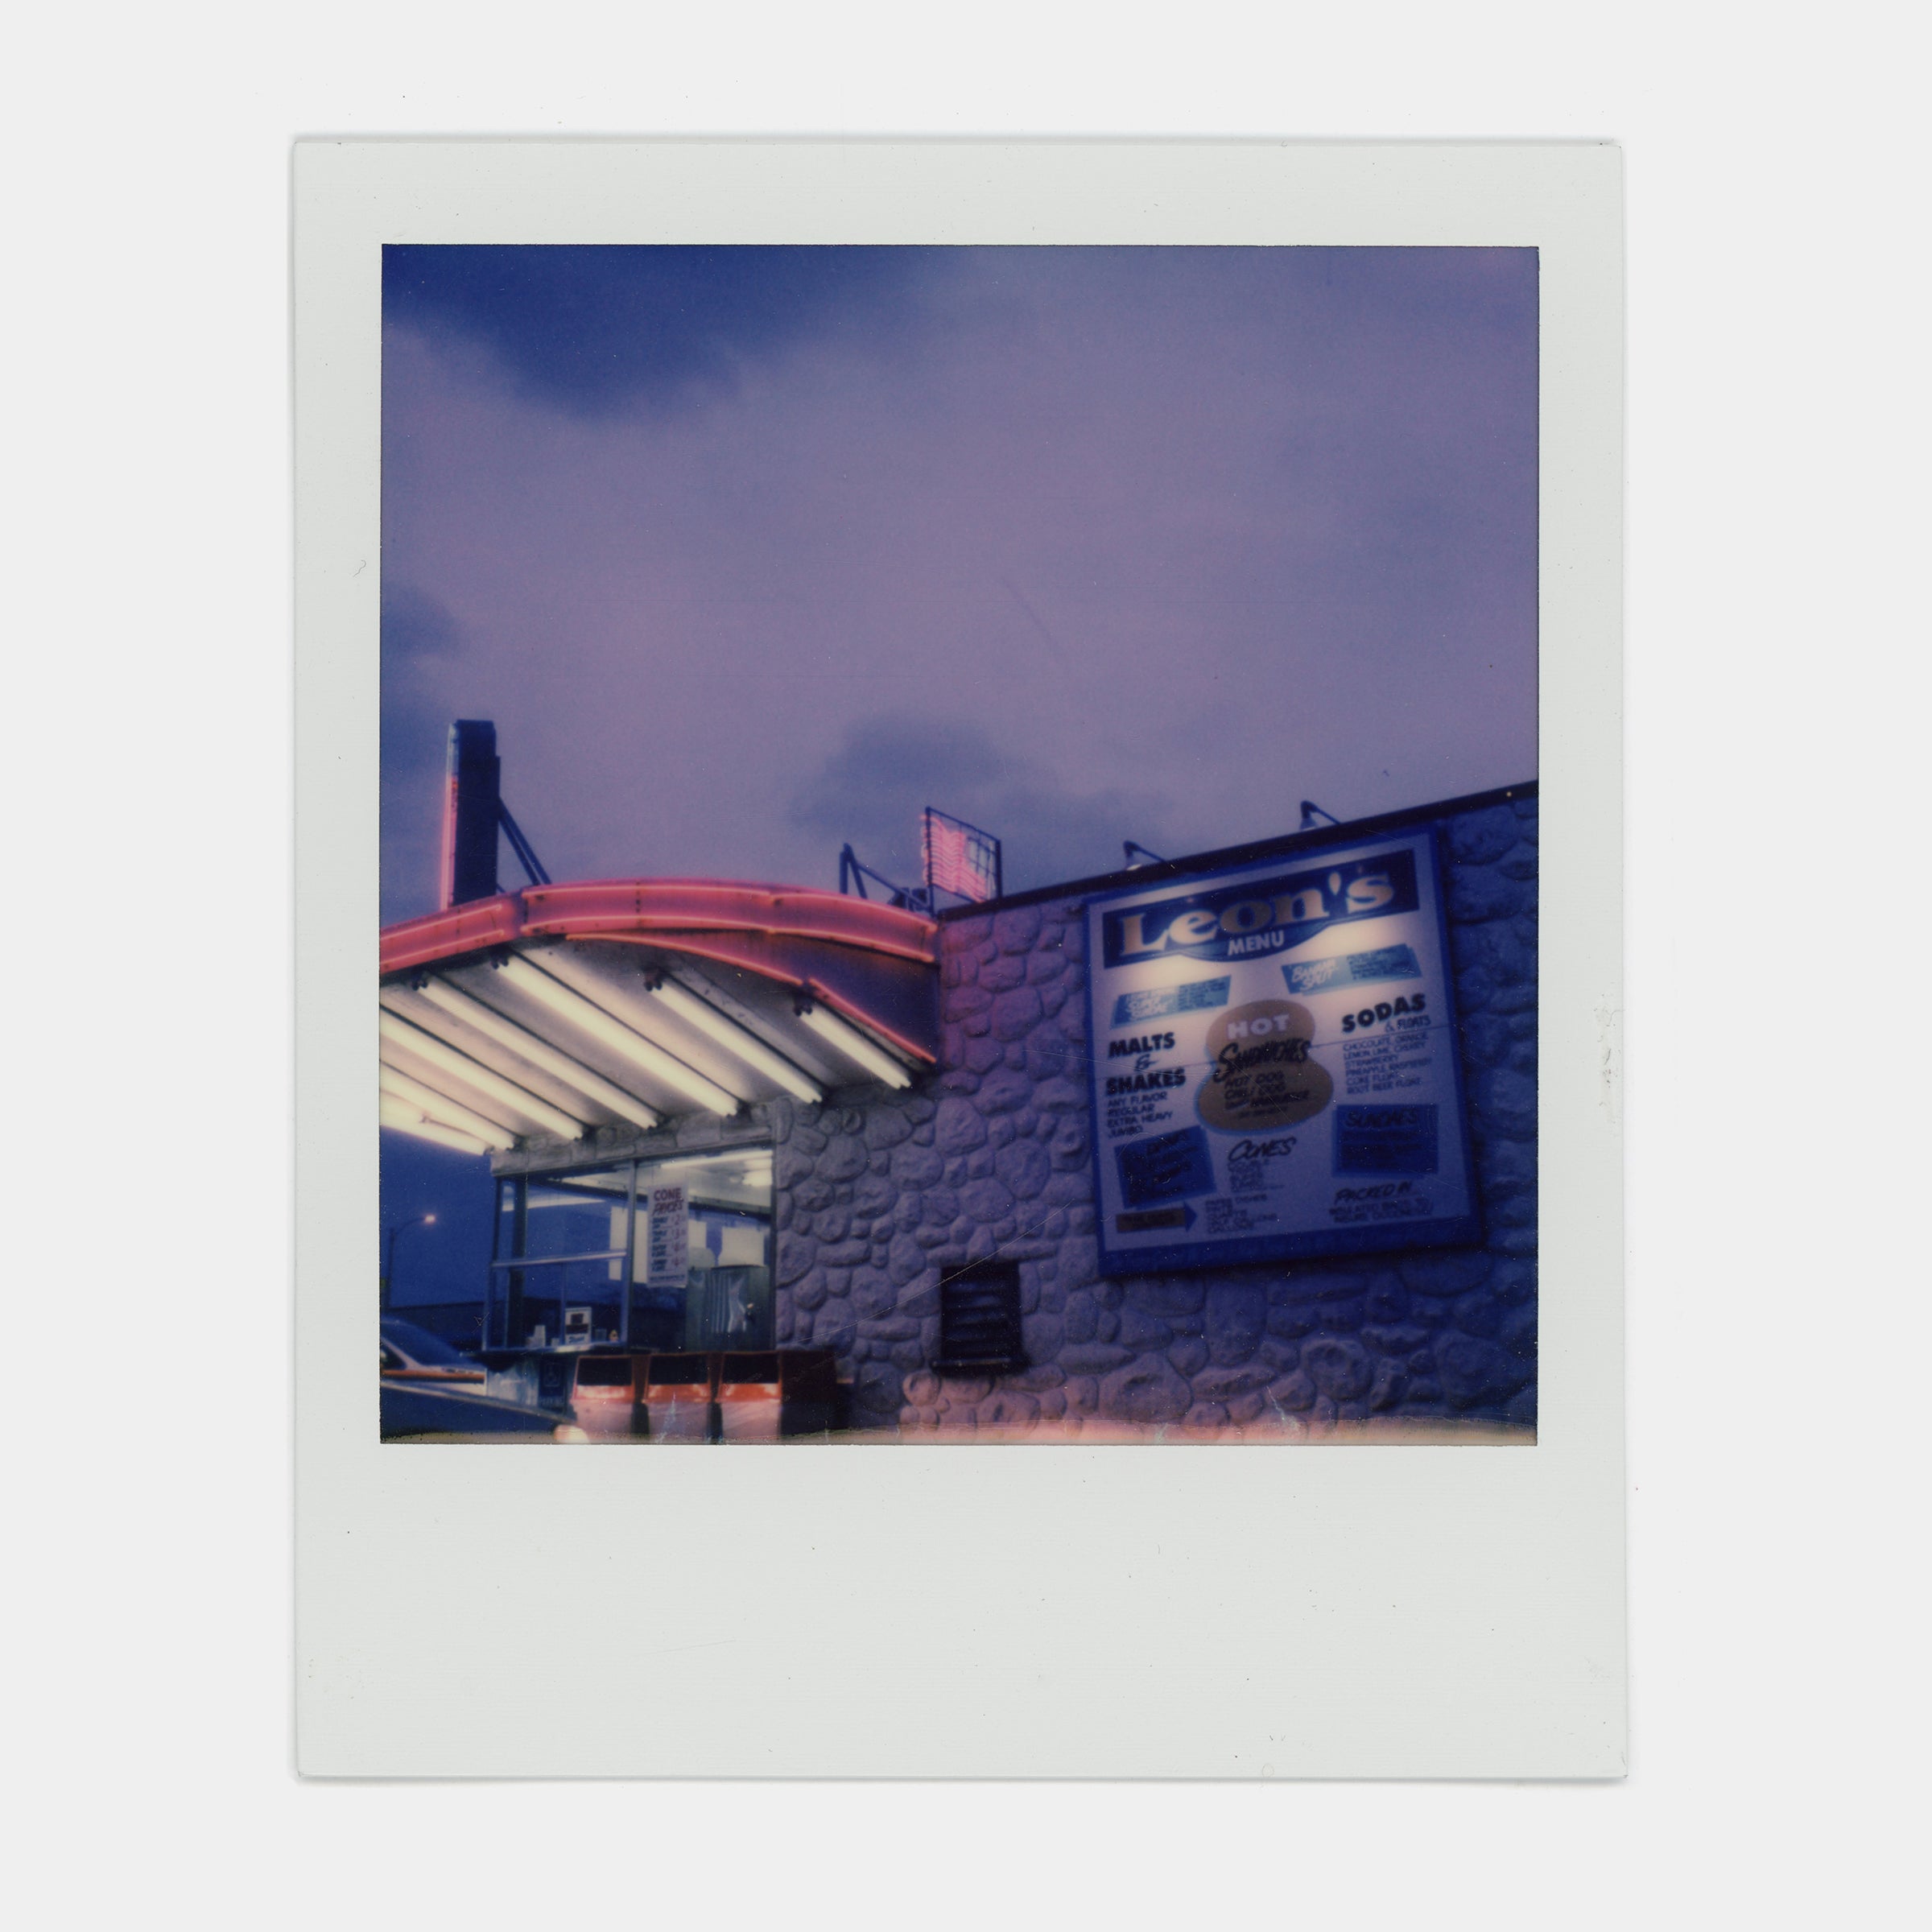 Expired Polaroid Color 600 Instant Film - Five Pack